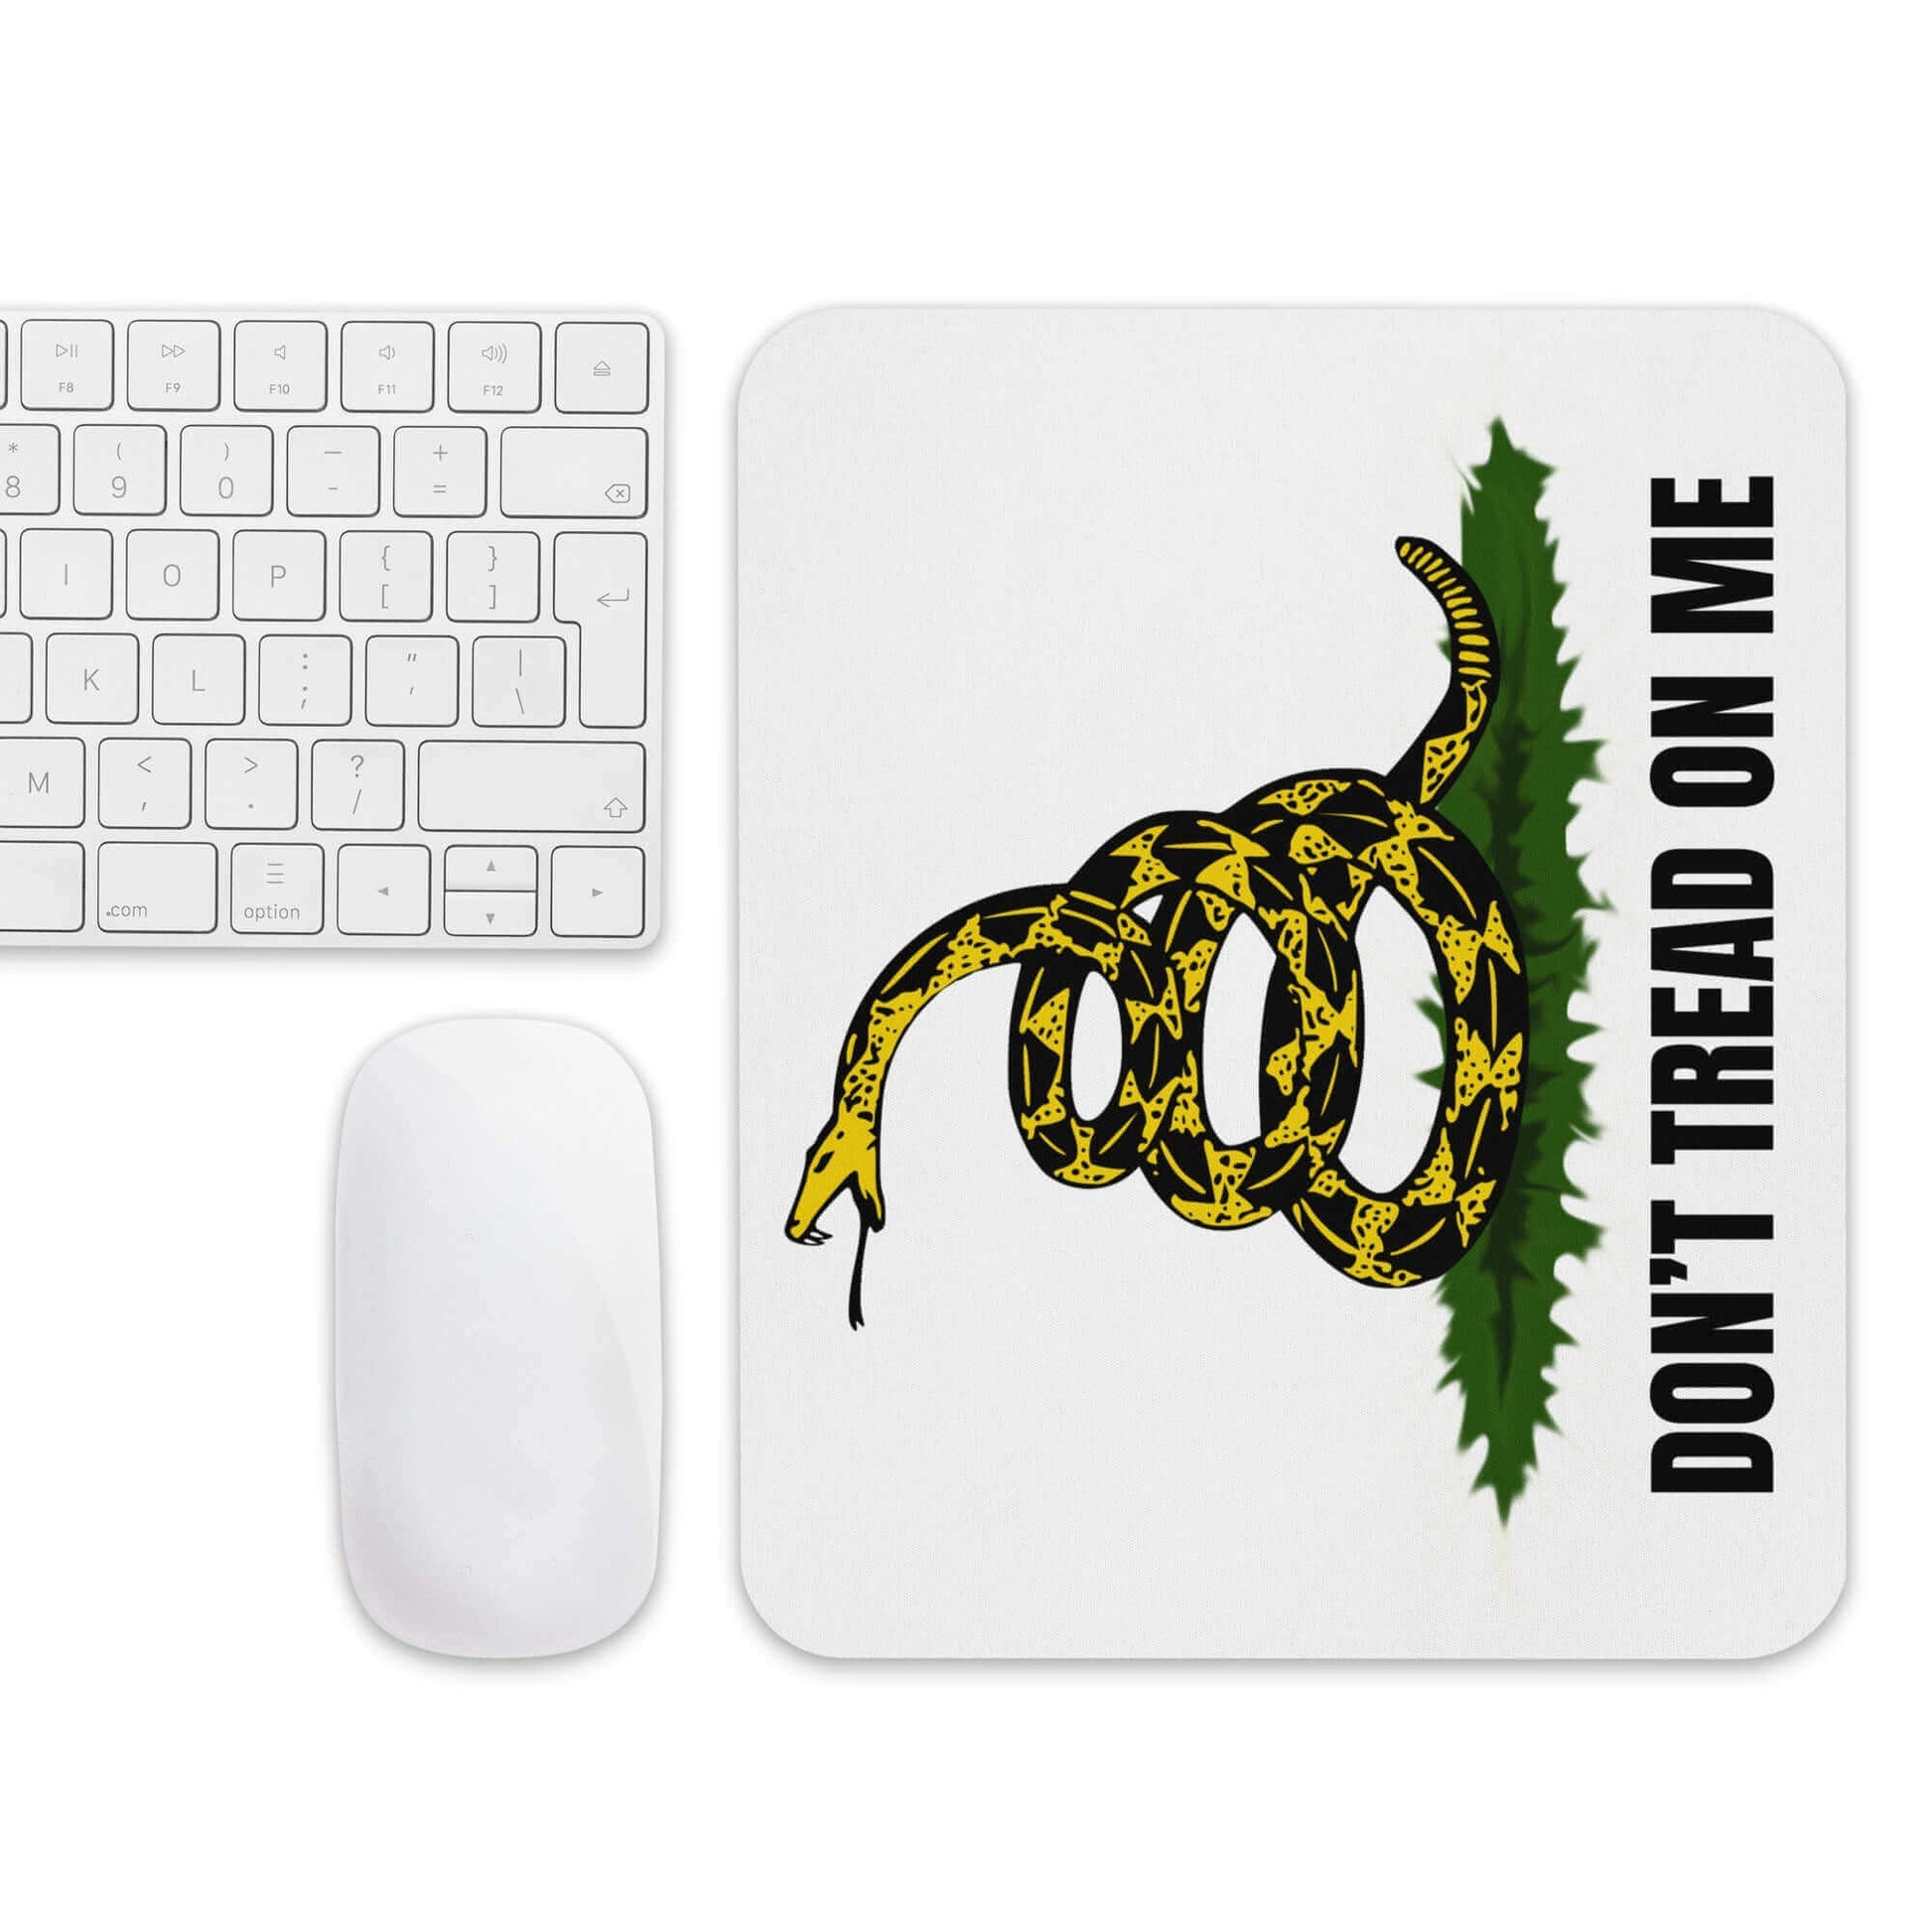 Don't tread on me - Mouse pad - Horrible Designs